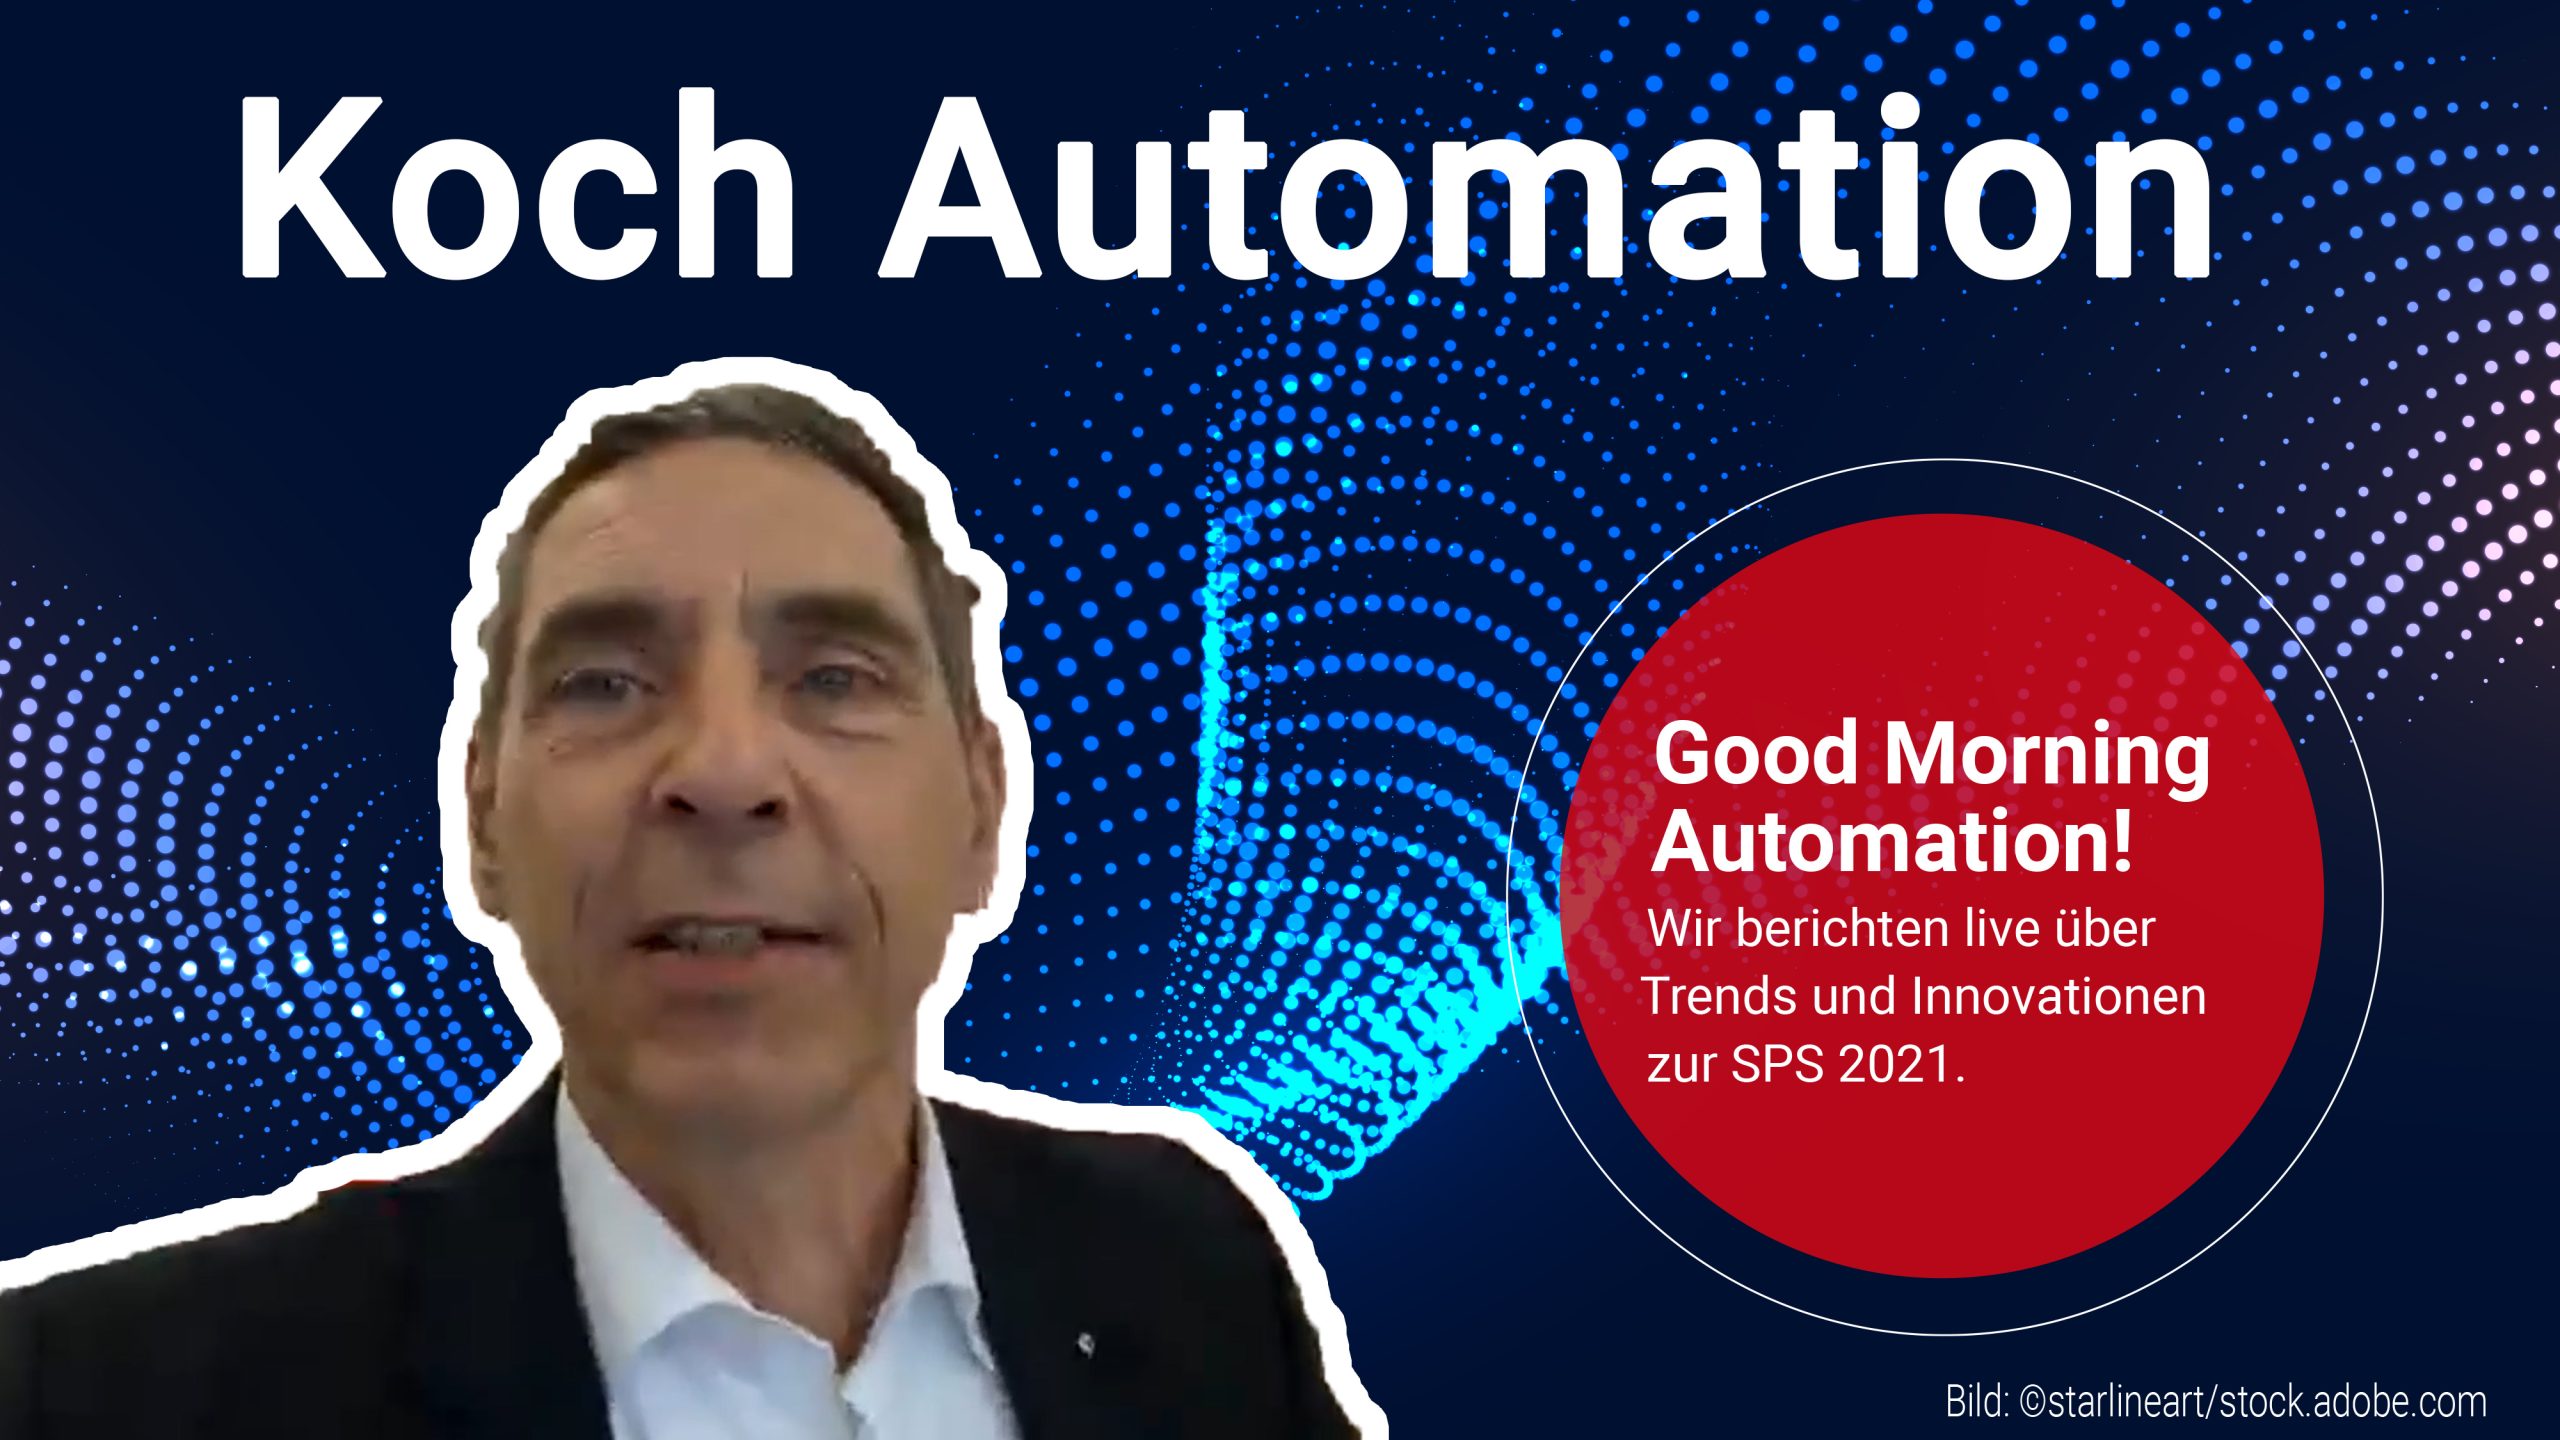 Koch Automation bei Good Morning Automation Tag 3